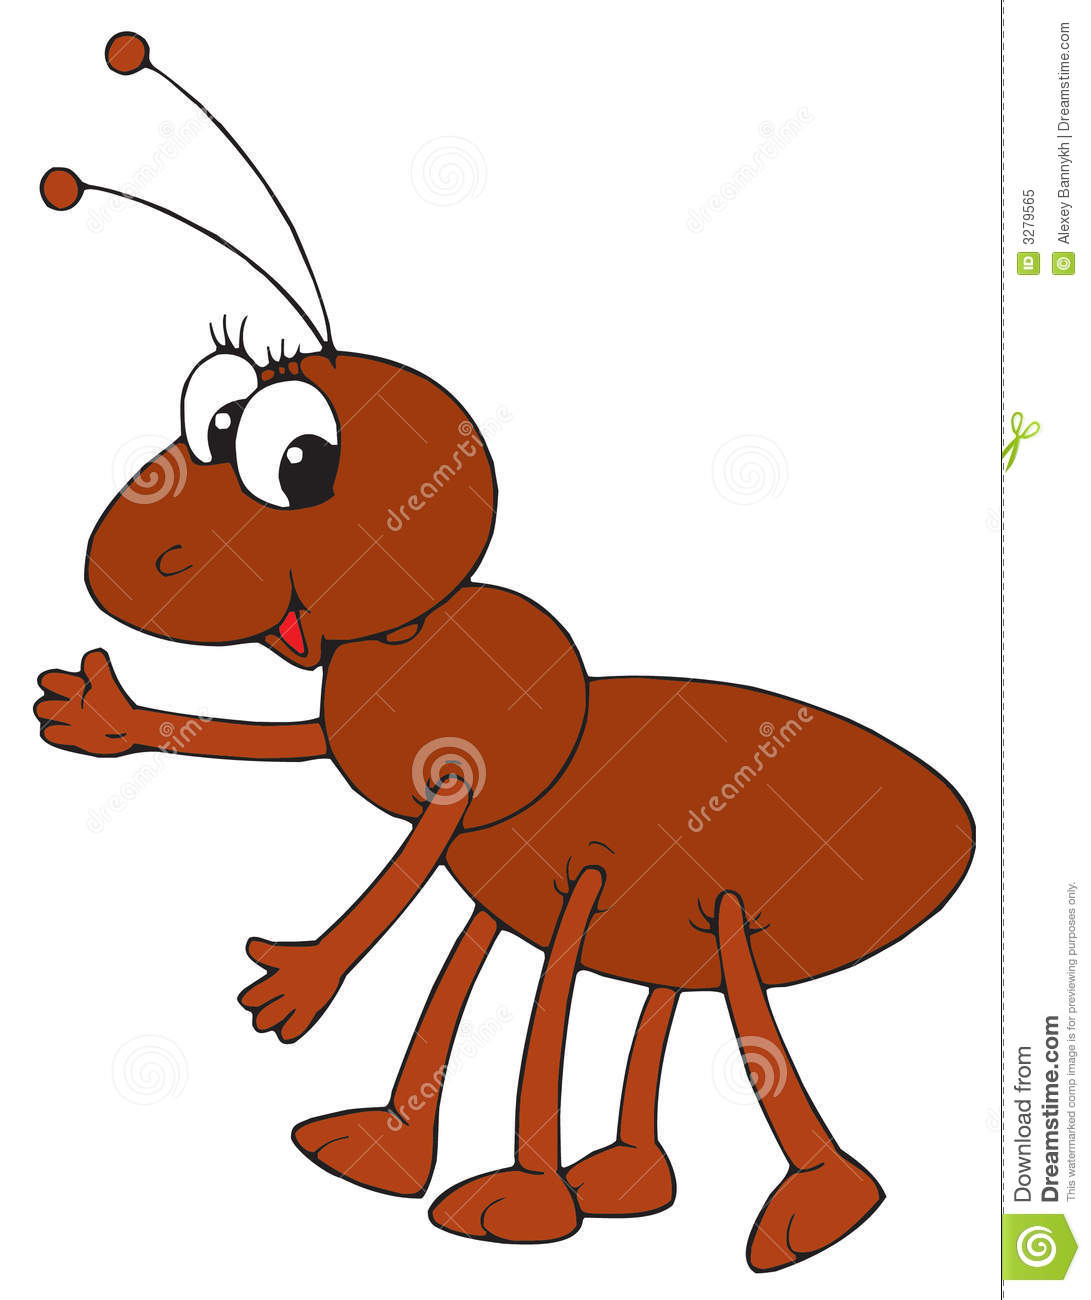 41 ant clipart.